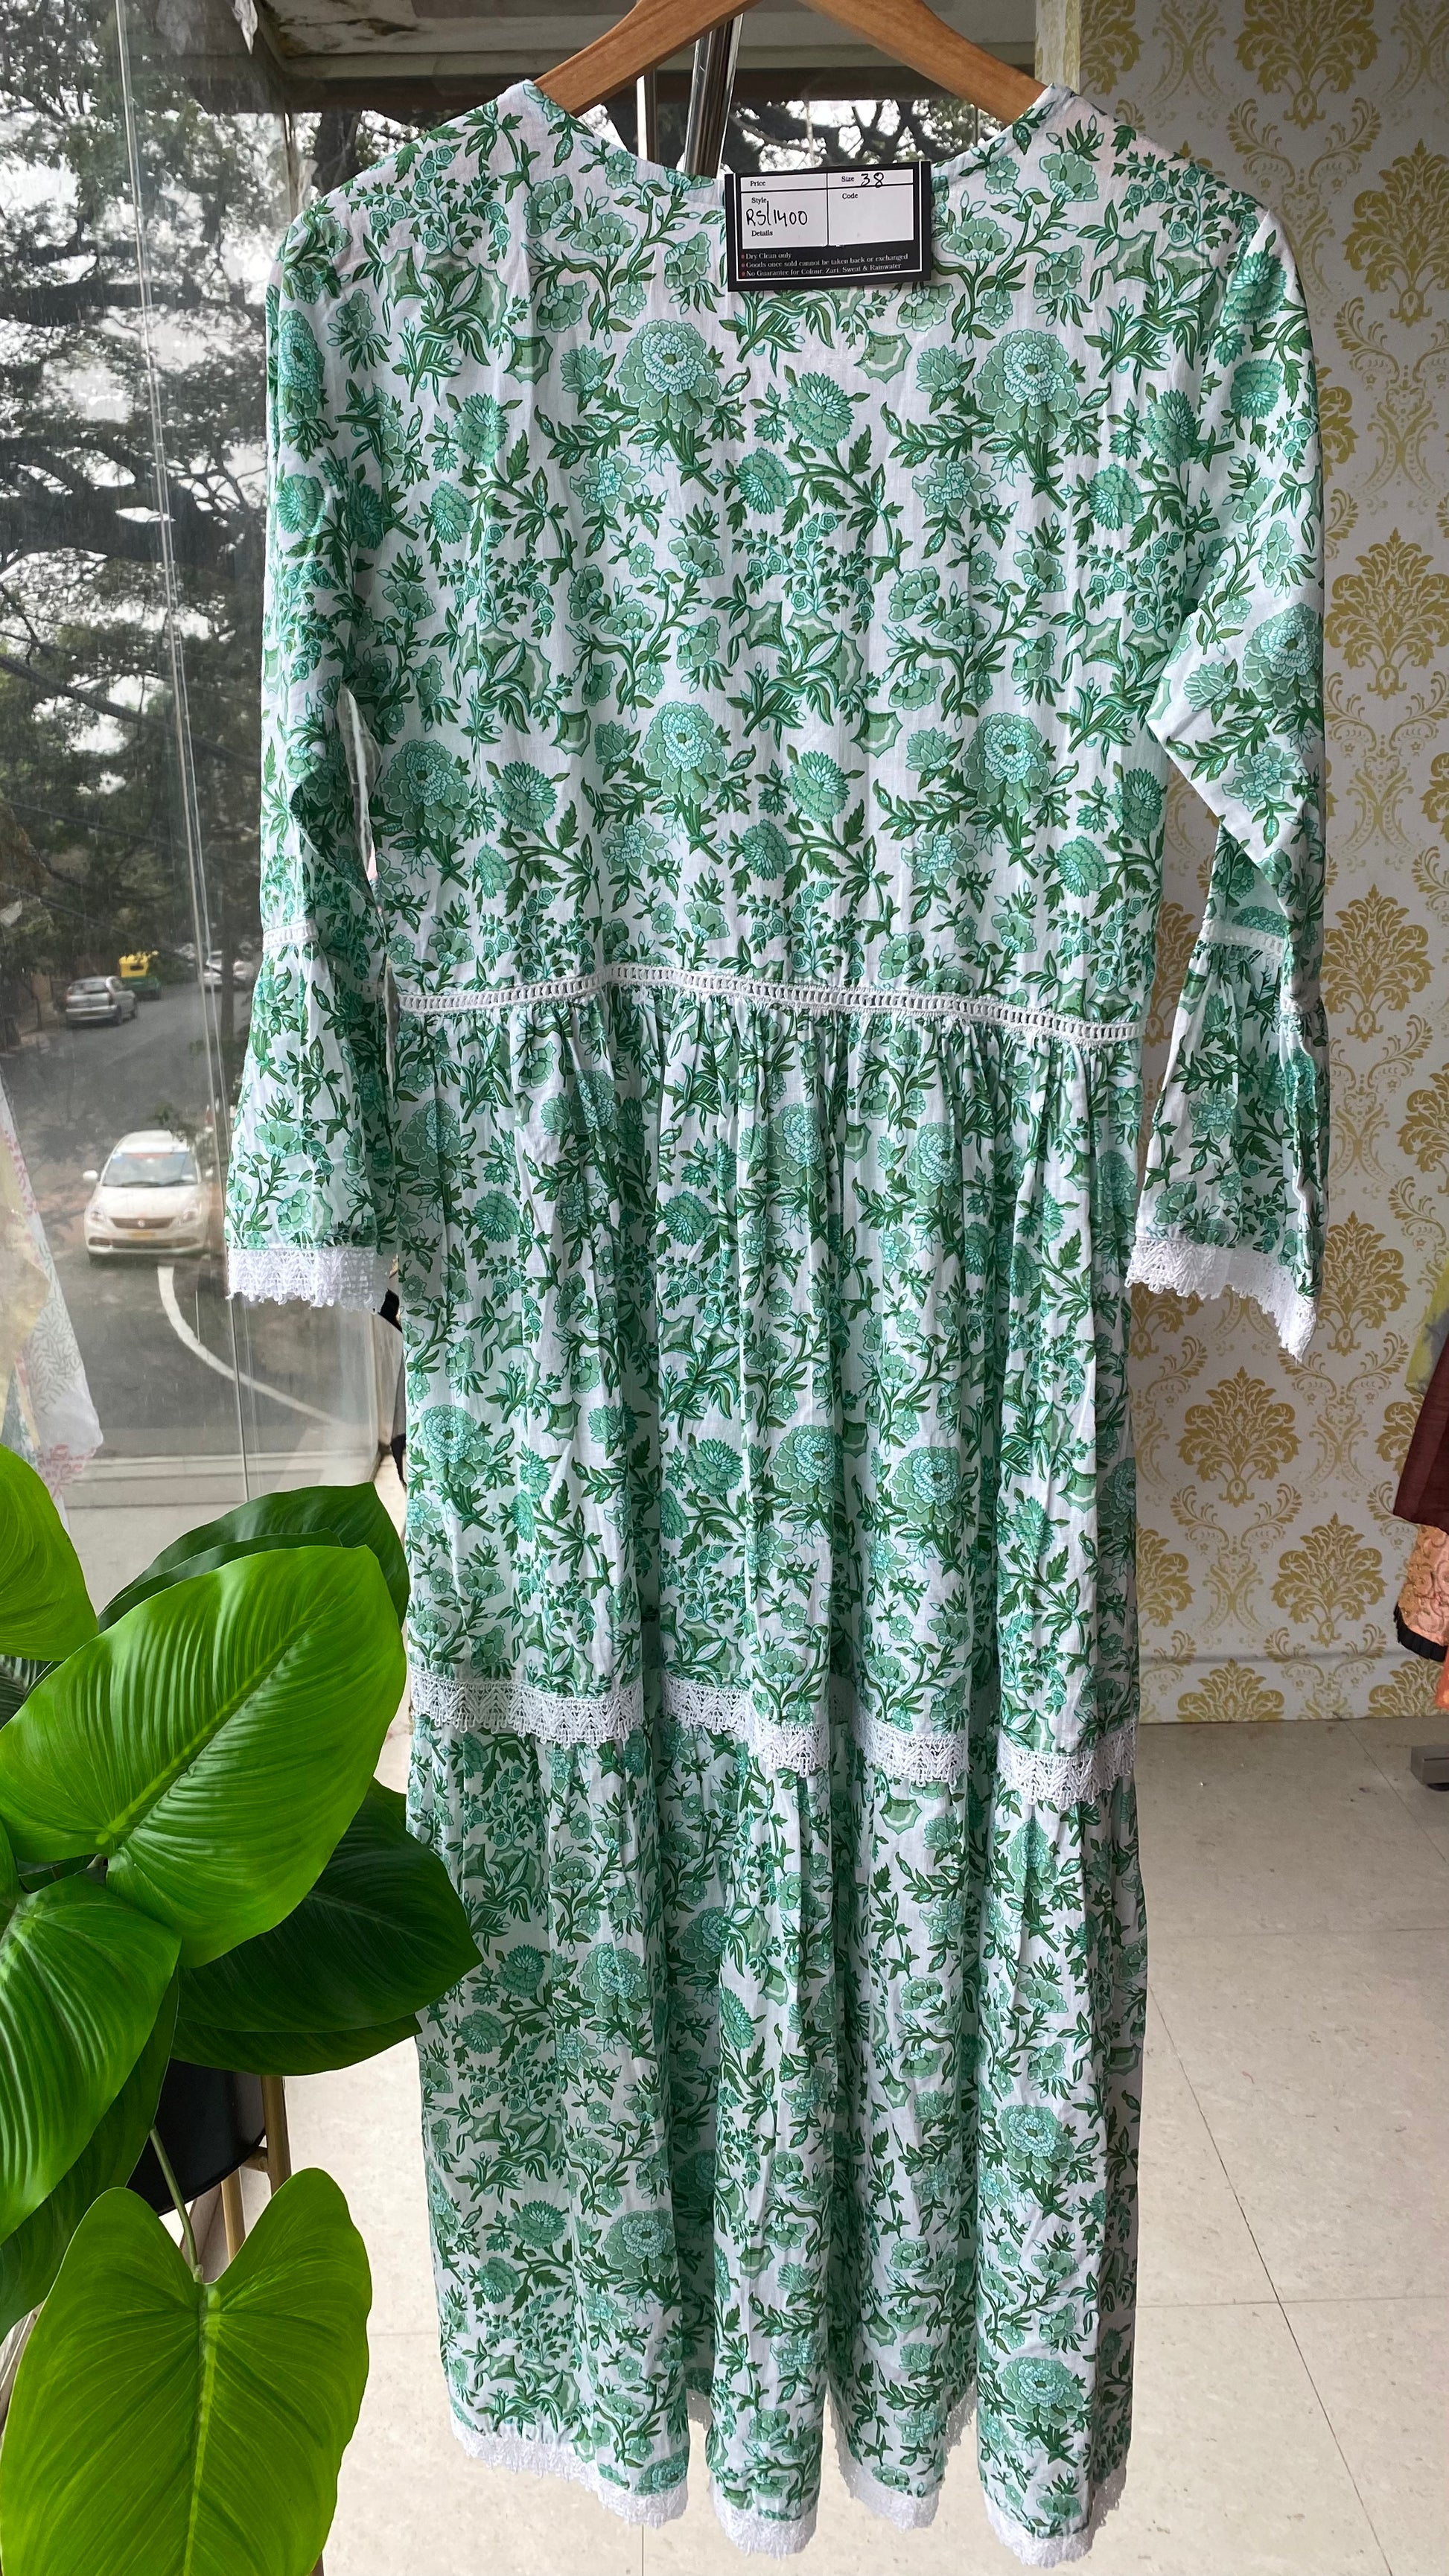 White and Green floral embroidery kurti top - Threads